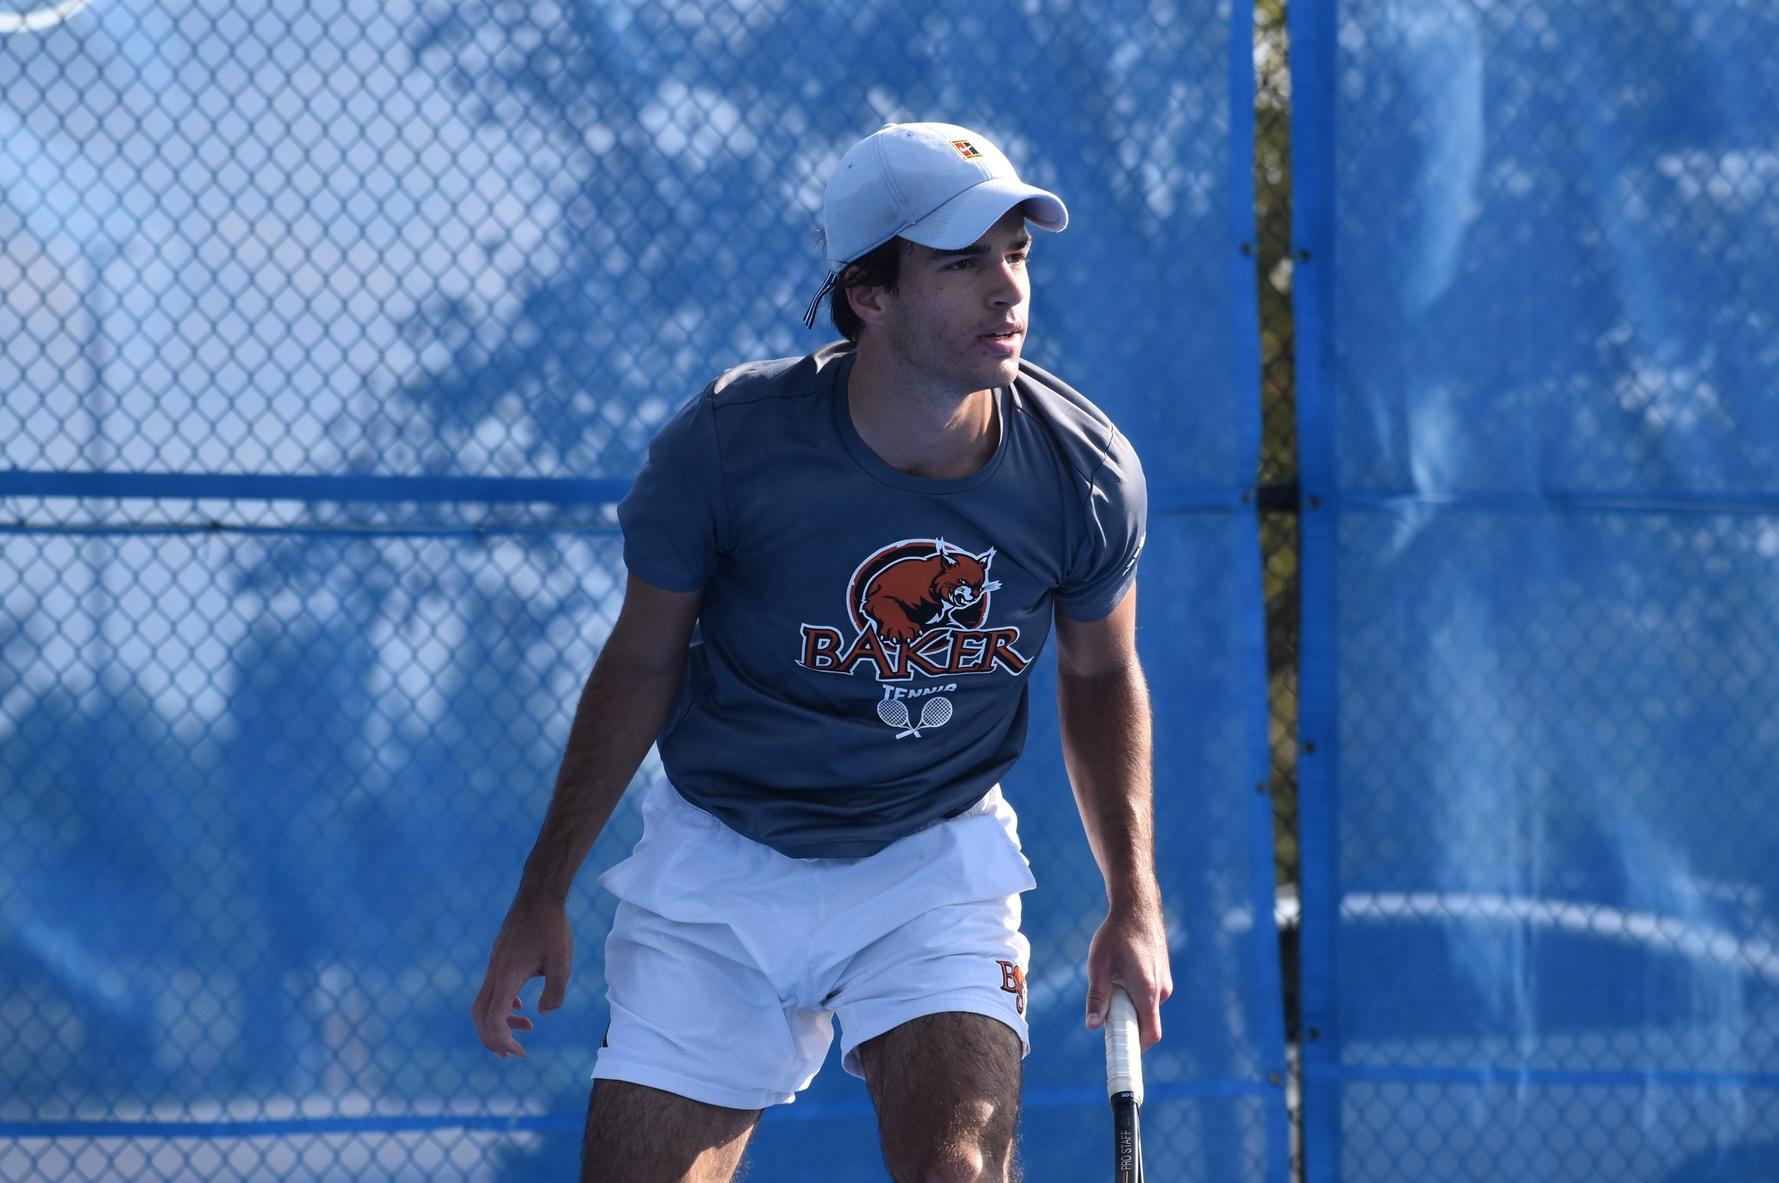 Baker Tennis Begins Fall Season with Matches Against Jets, Cardinals